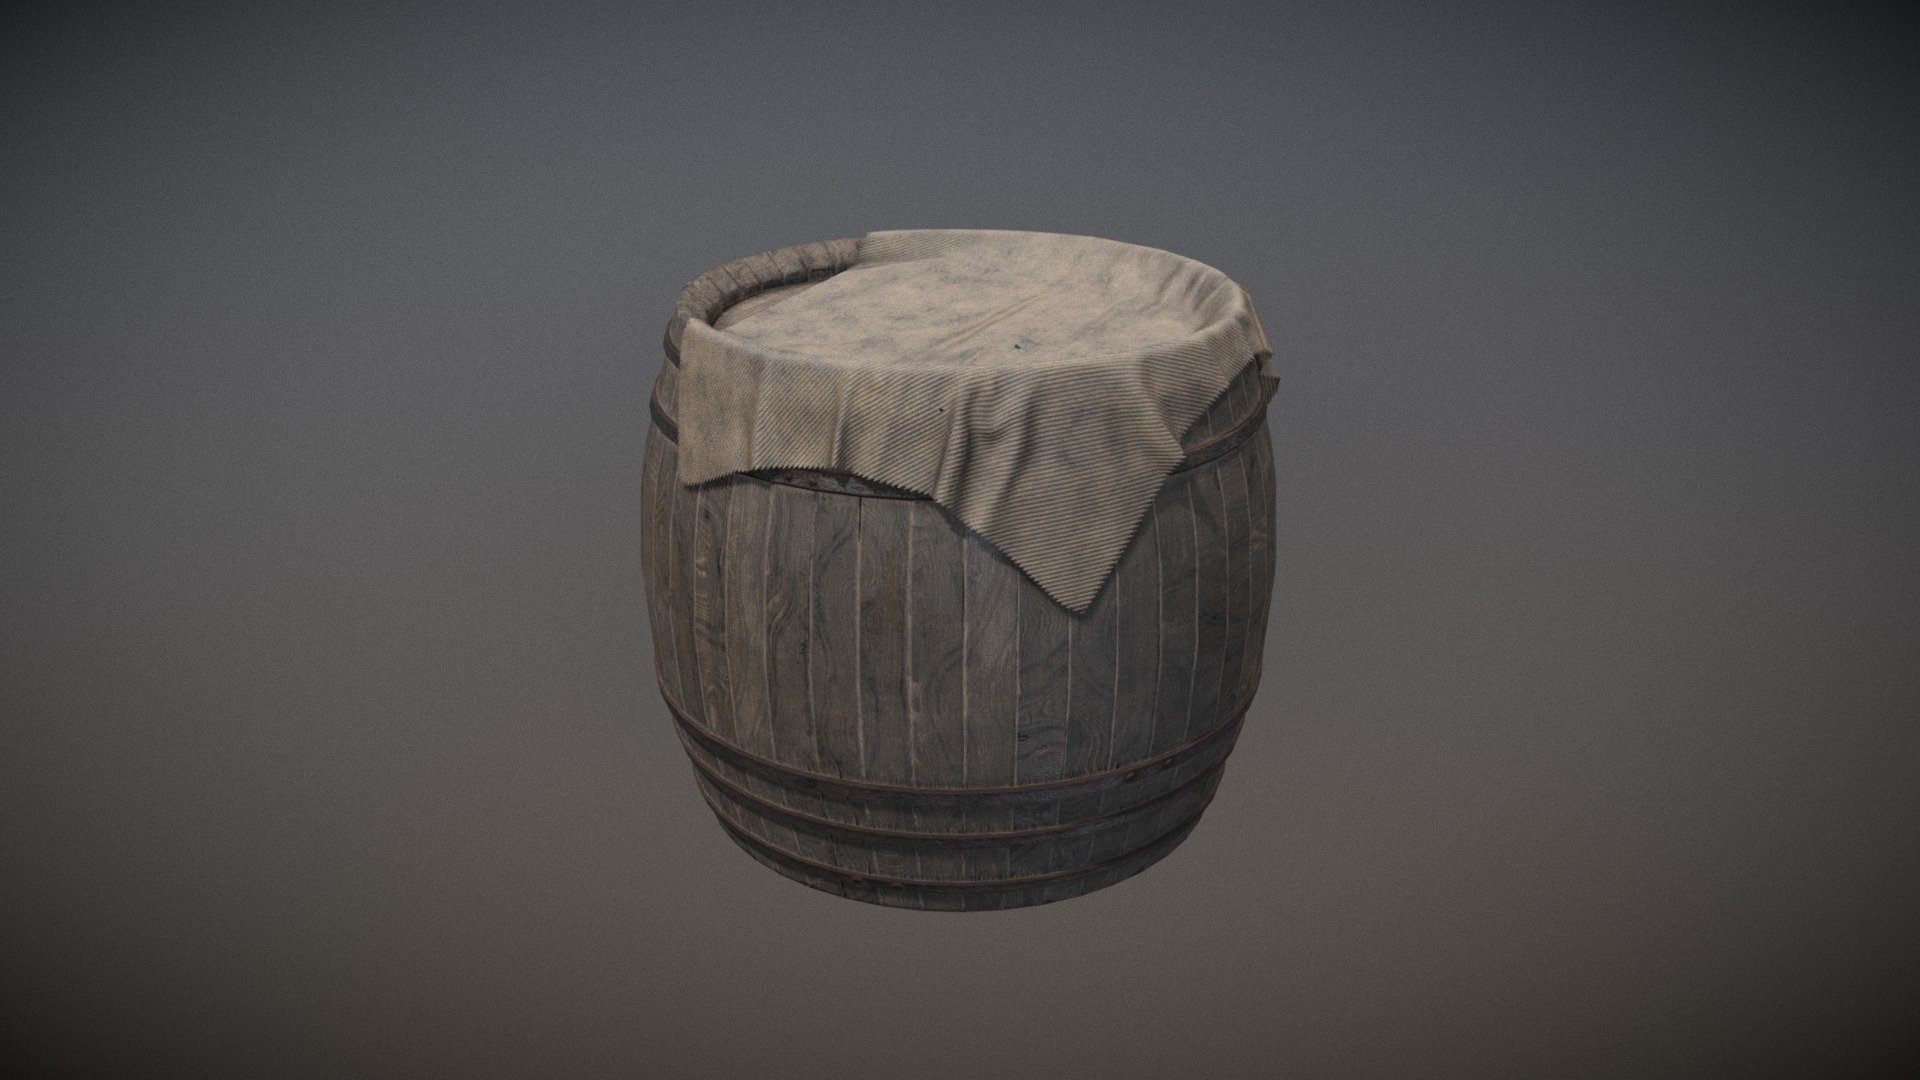 An big old barrel, full of whatever you want. Plus a cloth draping over. 

LODs done by hand

Part of the “Old Tavern” set - https://goo.gl/KuknSf Part of the “Old” series - https://goo.gl/XWypwo - Big Barrel + Cloth - Buy Royalty Free 3D model by inedible.red (@inediblered) 3d model